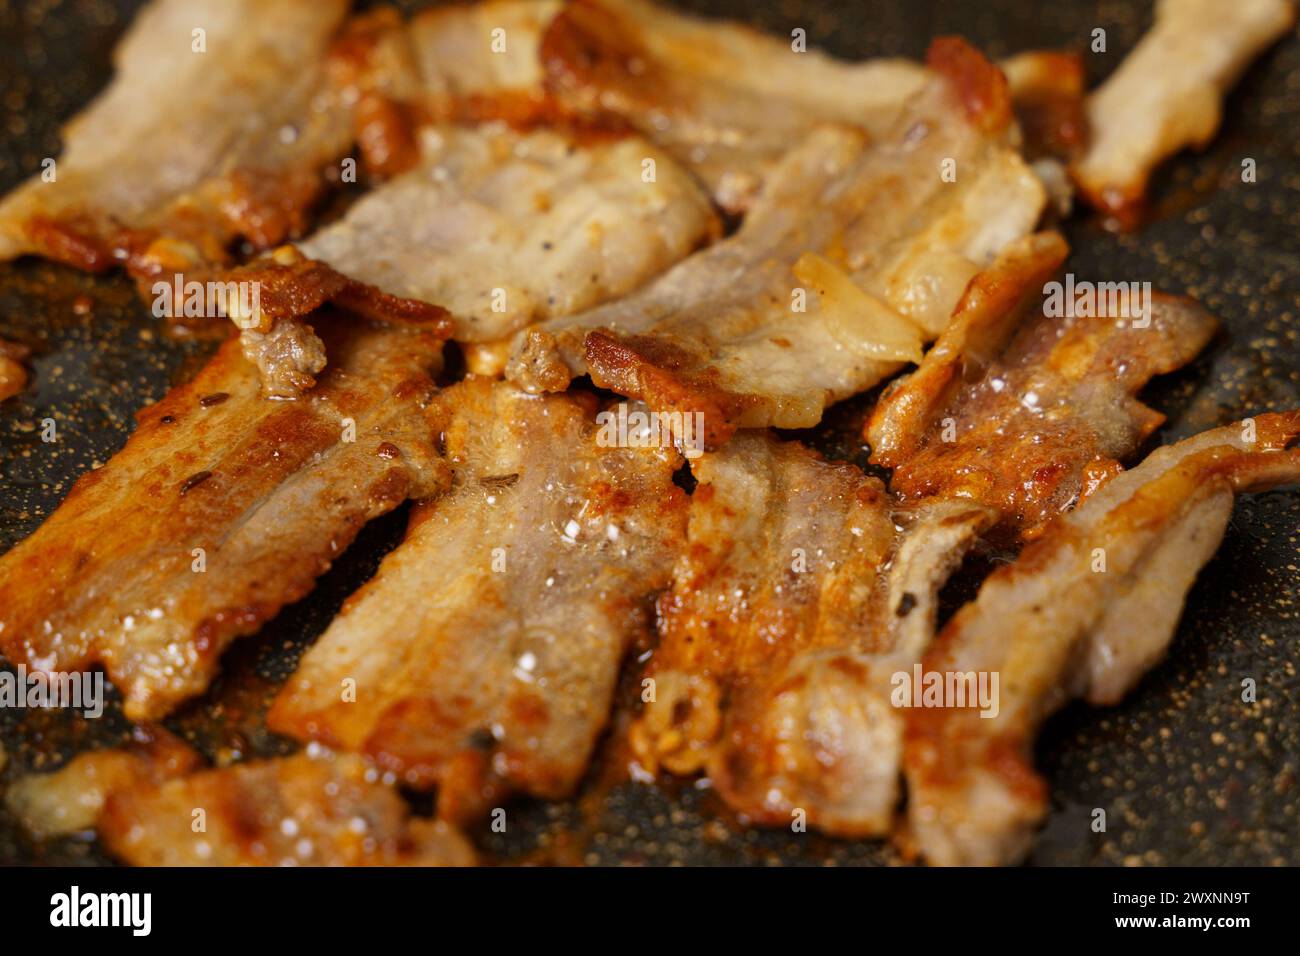 A detailed view of raw meat sizzling and searing on a hot cooking pan, with visible grill marks forming. Stock Photo